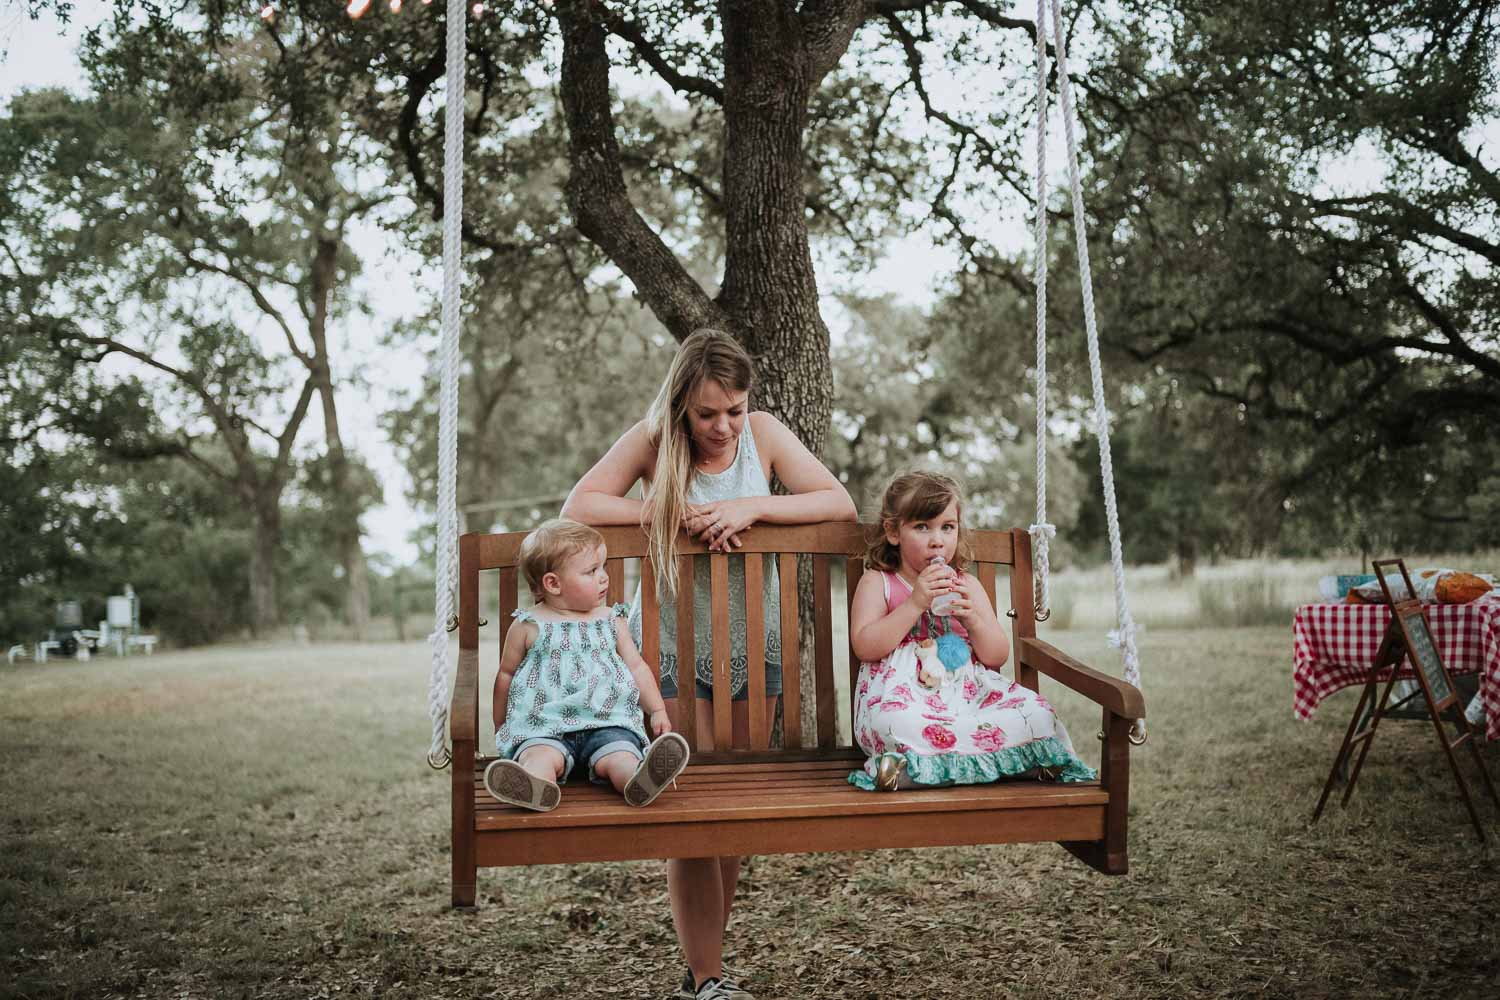 Kids pushed on a tress swing in Bulverde, Texas